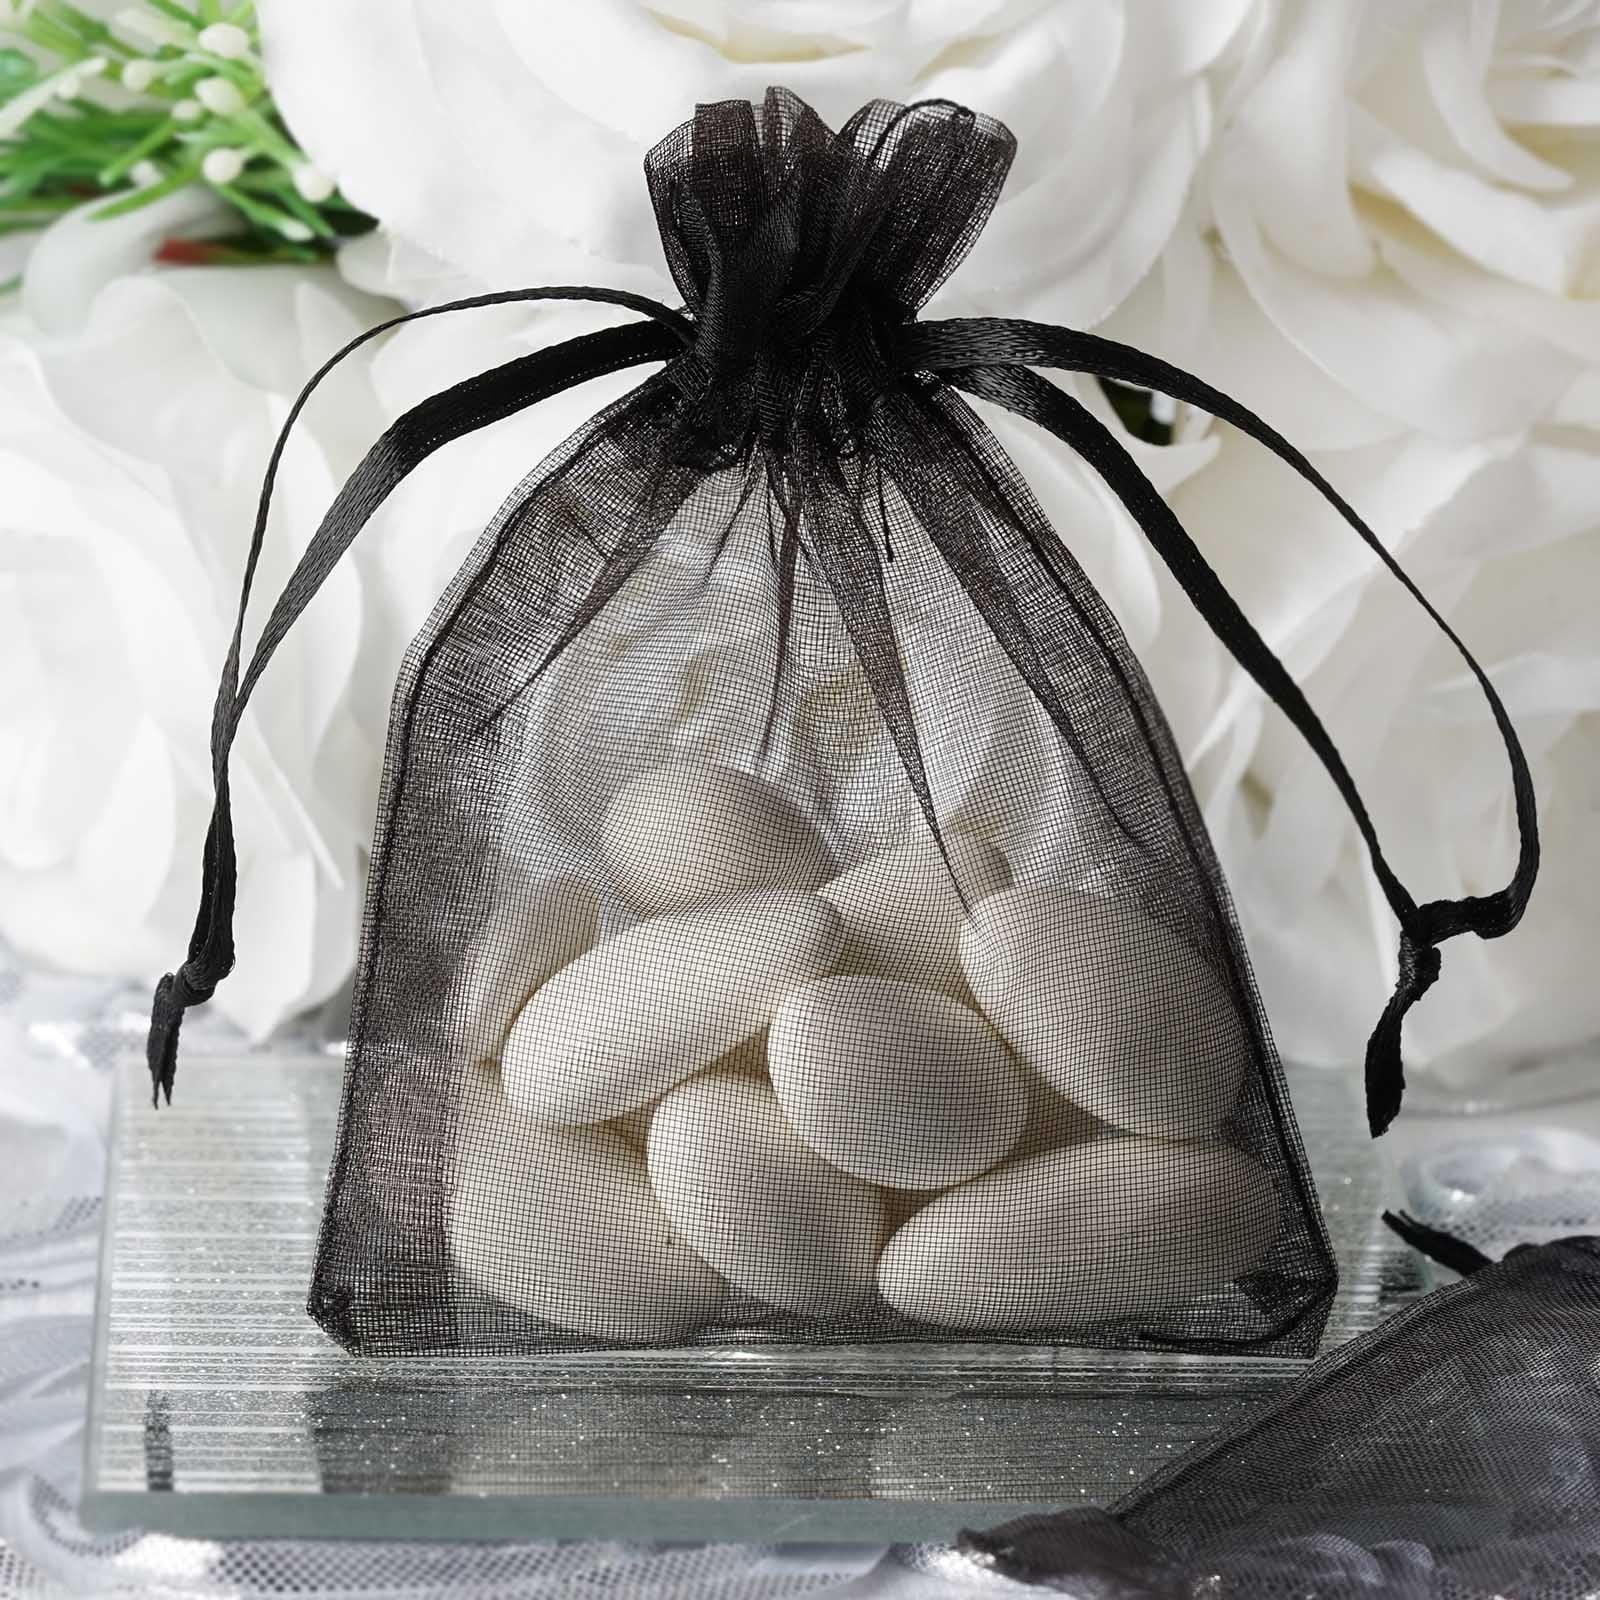 25/50/100 pcs Luxury Sweets Cake Candy Gift Favour Favors Boxes Bride & Groom#8 